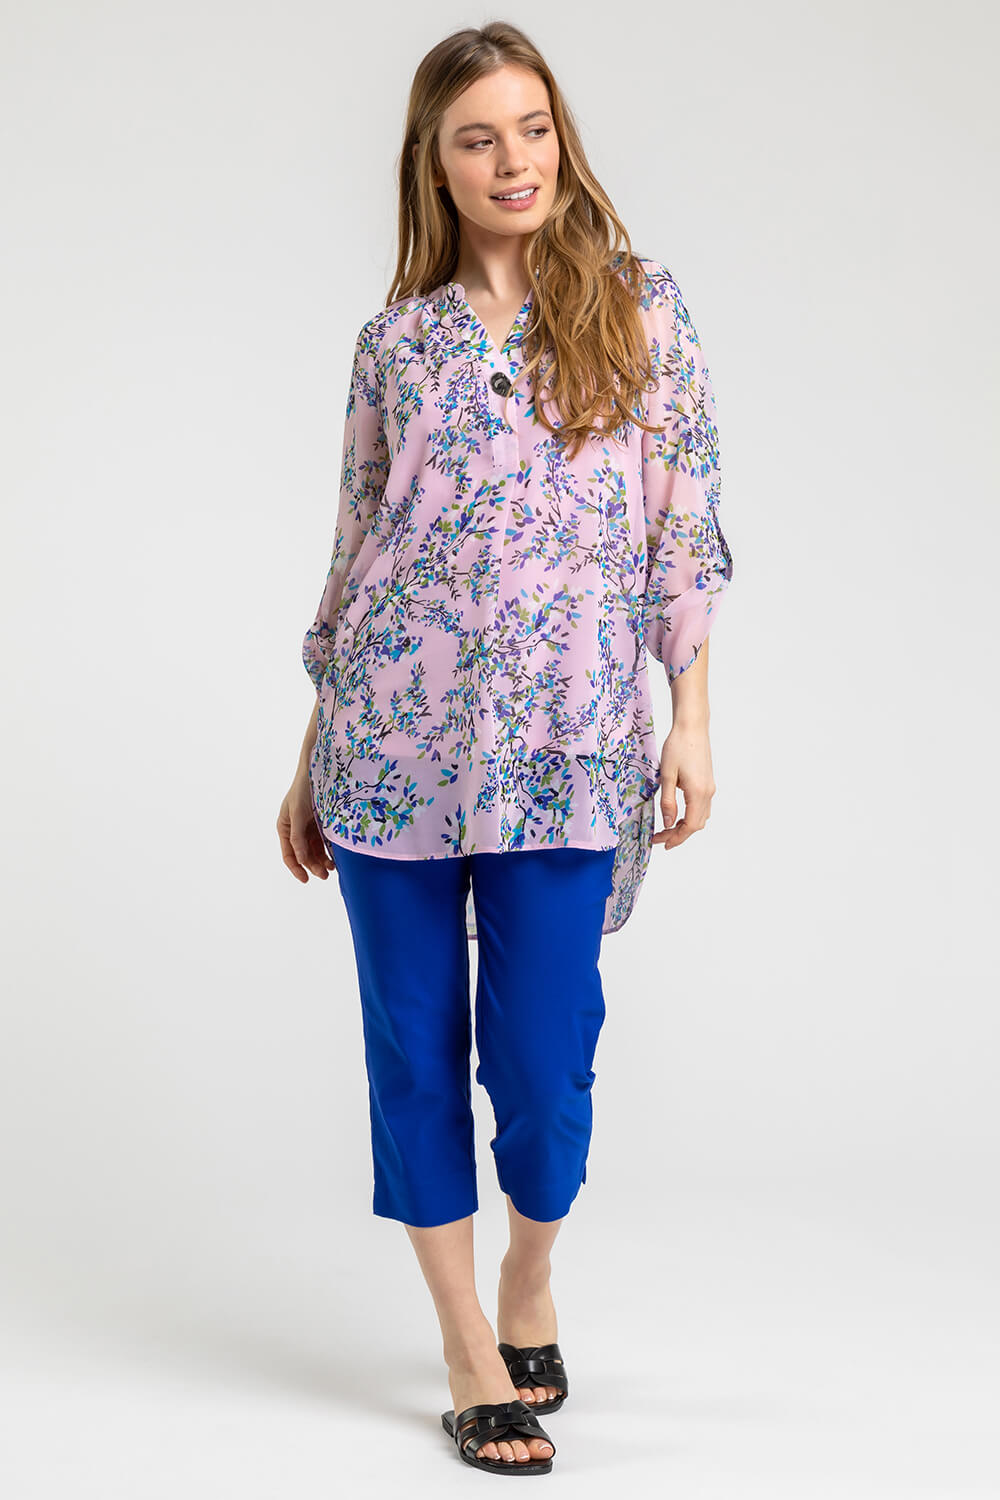 PINK Petite Ditsy Floral Button Detail Top, Image 3 of 5